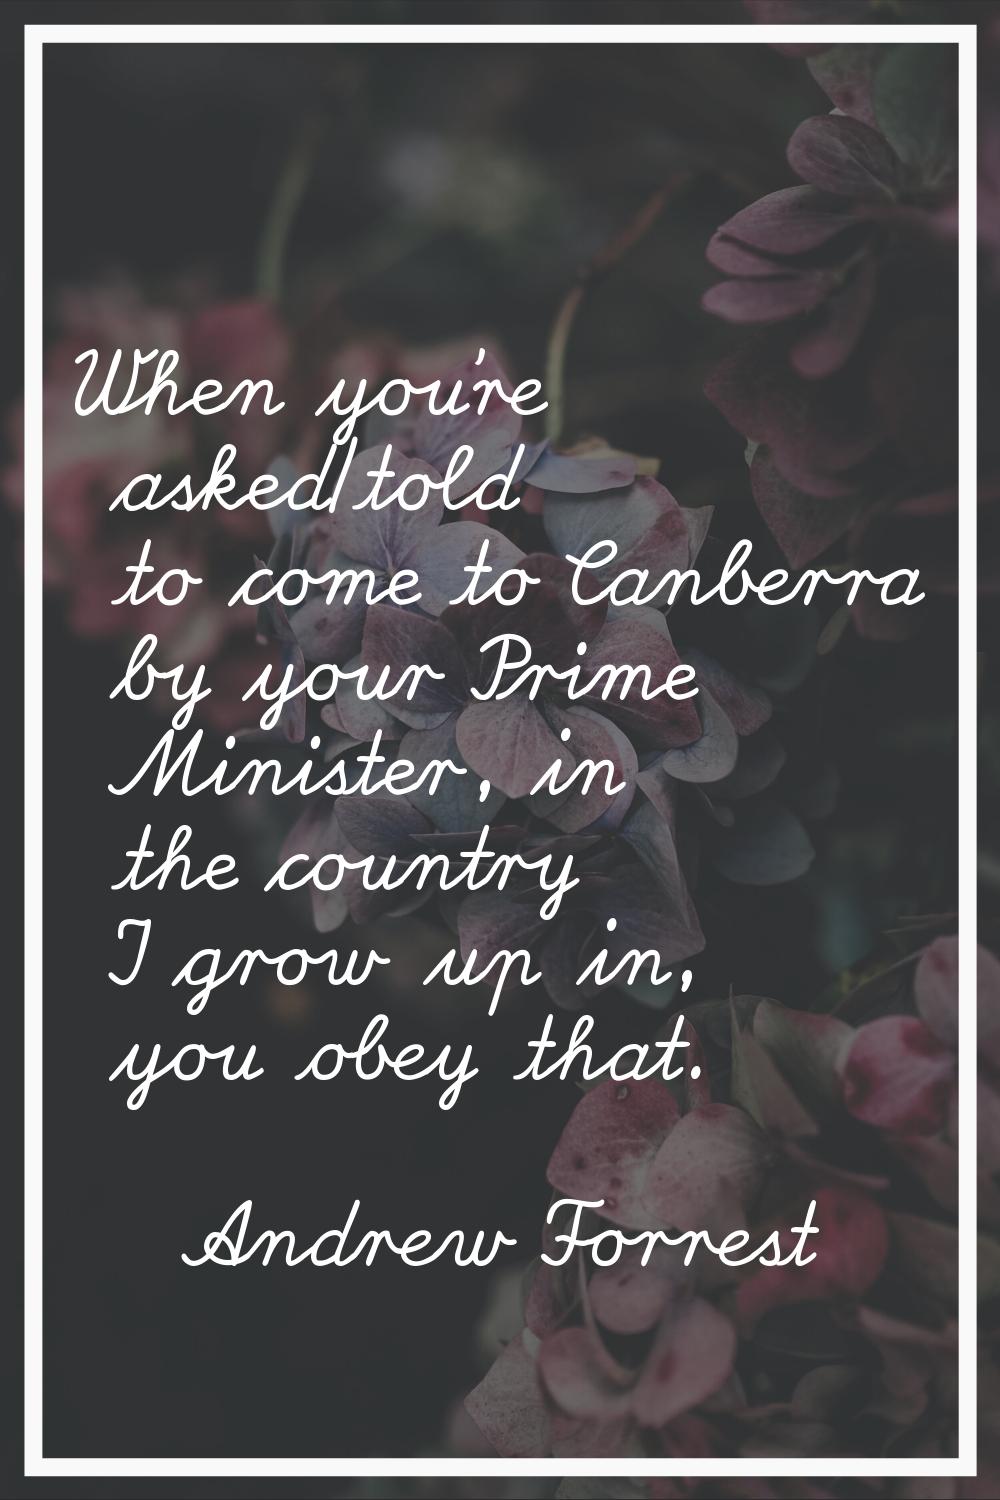 When you're asked/told to come to Canberra by your Prime Minister, in the country I grow up in, you